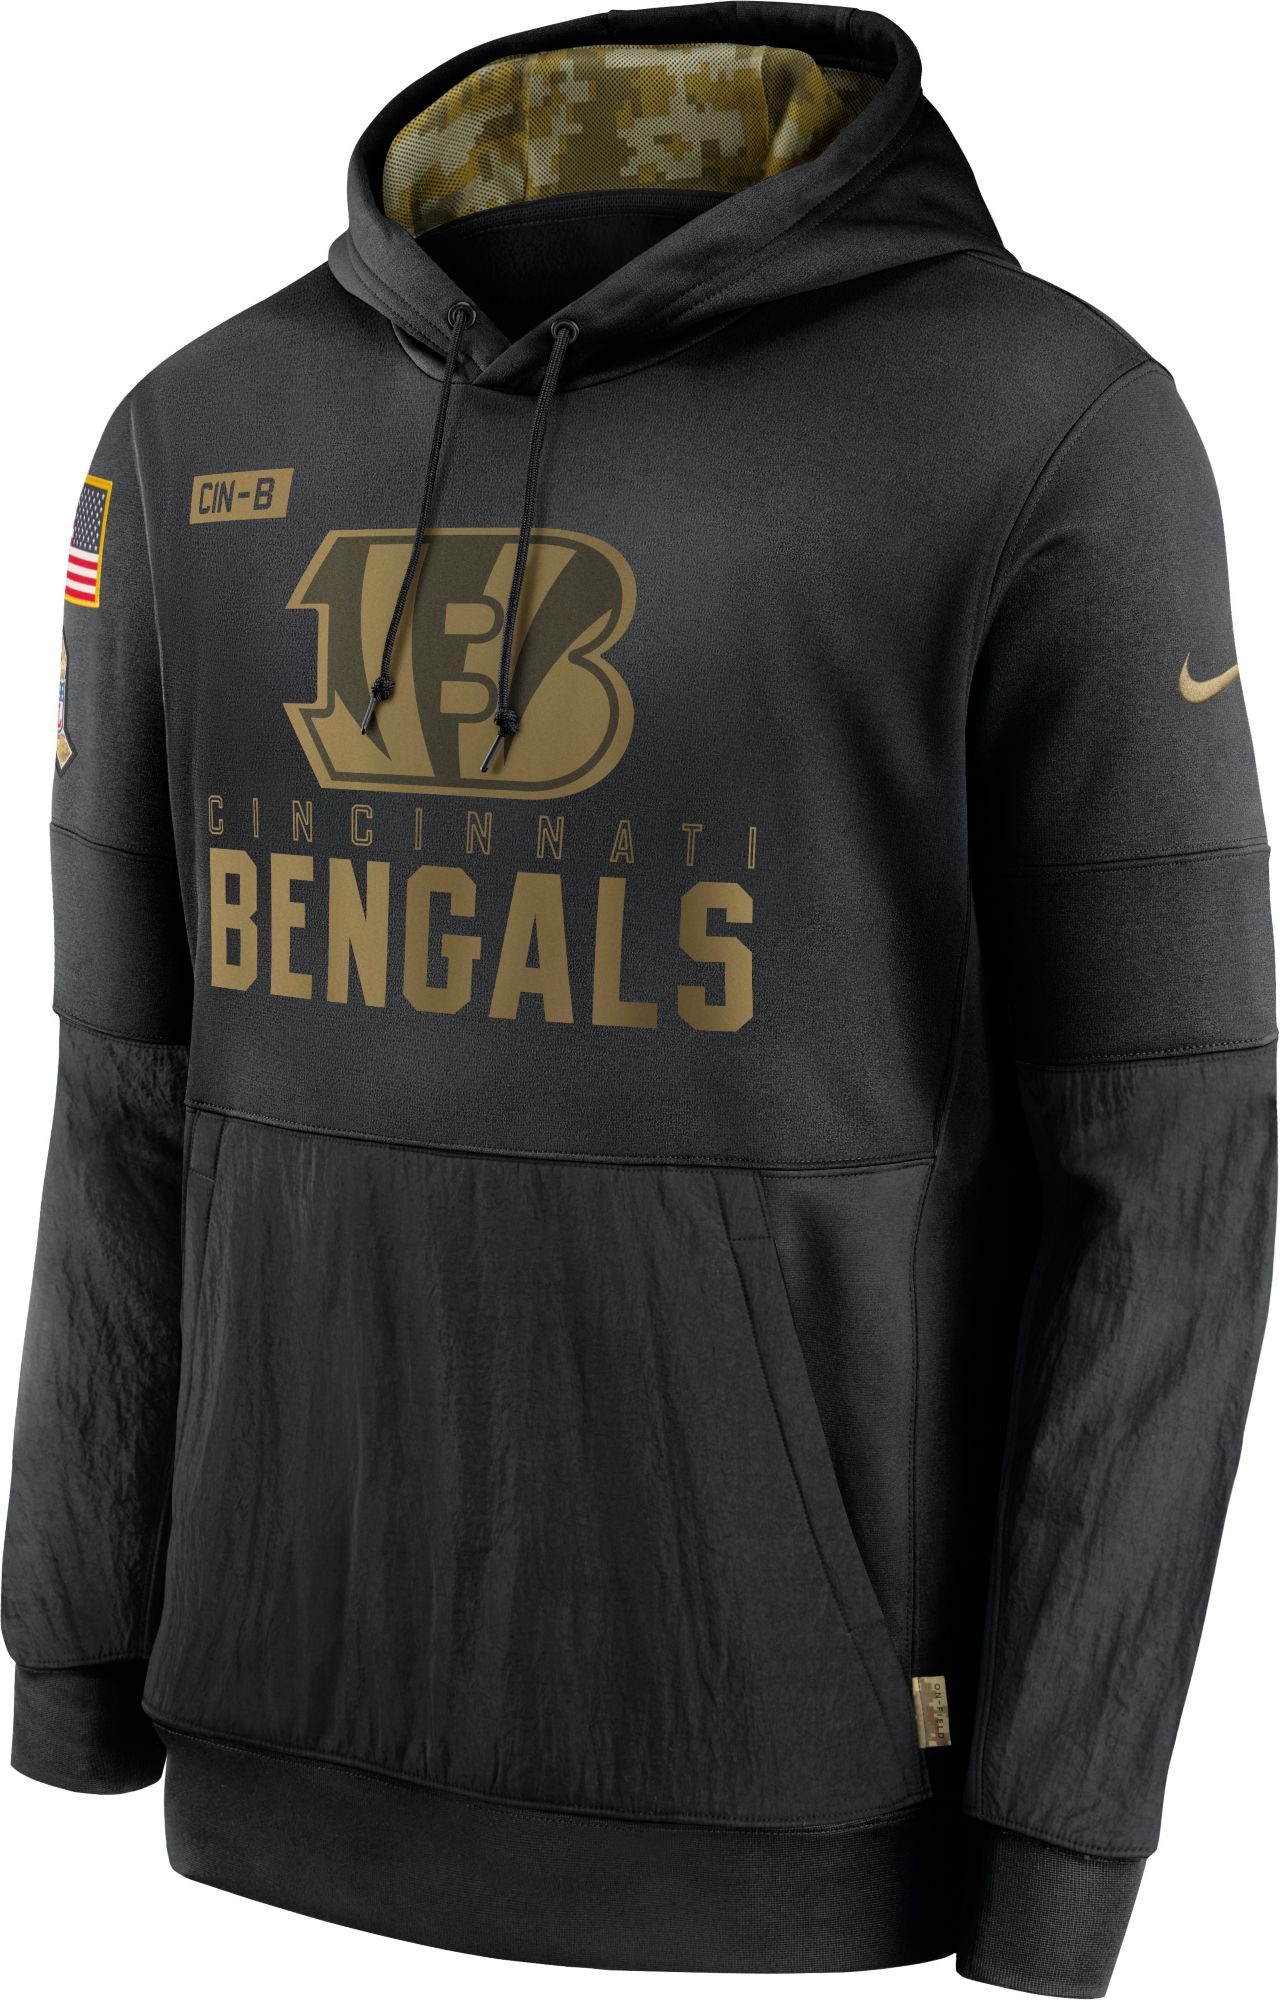 bengals salute to service hoodie